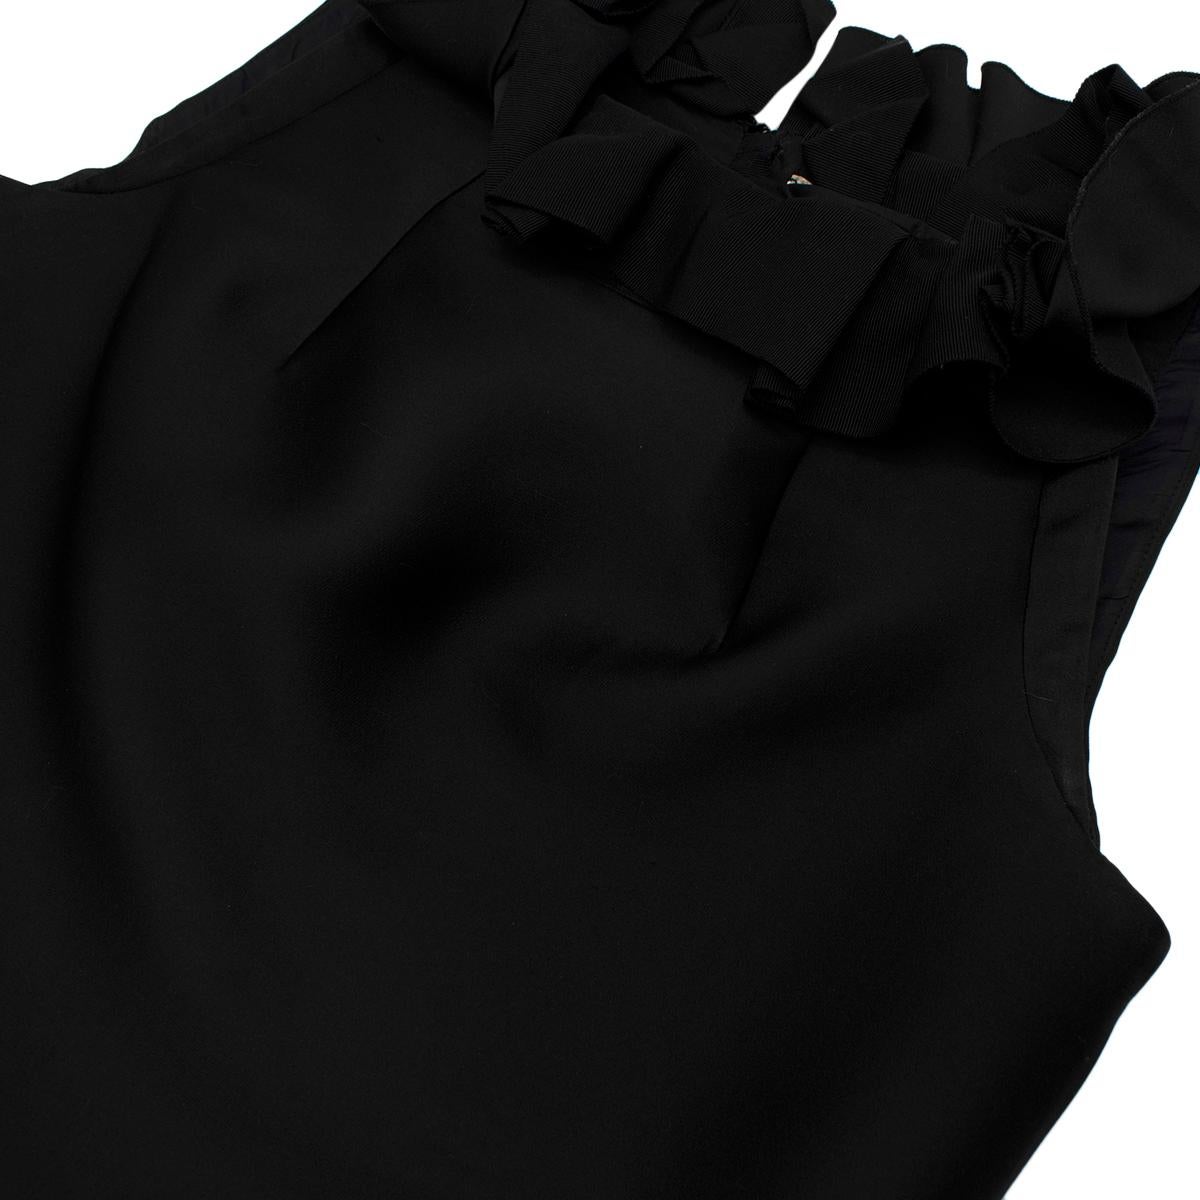 Lanvin Black Ruffled Cocktail Dress - US size 6 In New Condition For Sale In London, GB